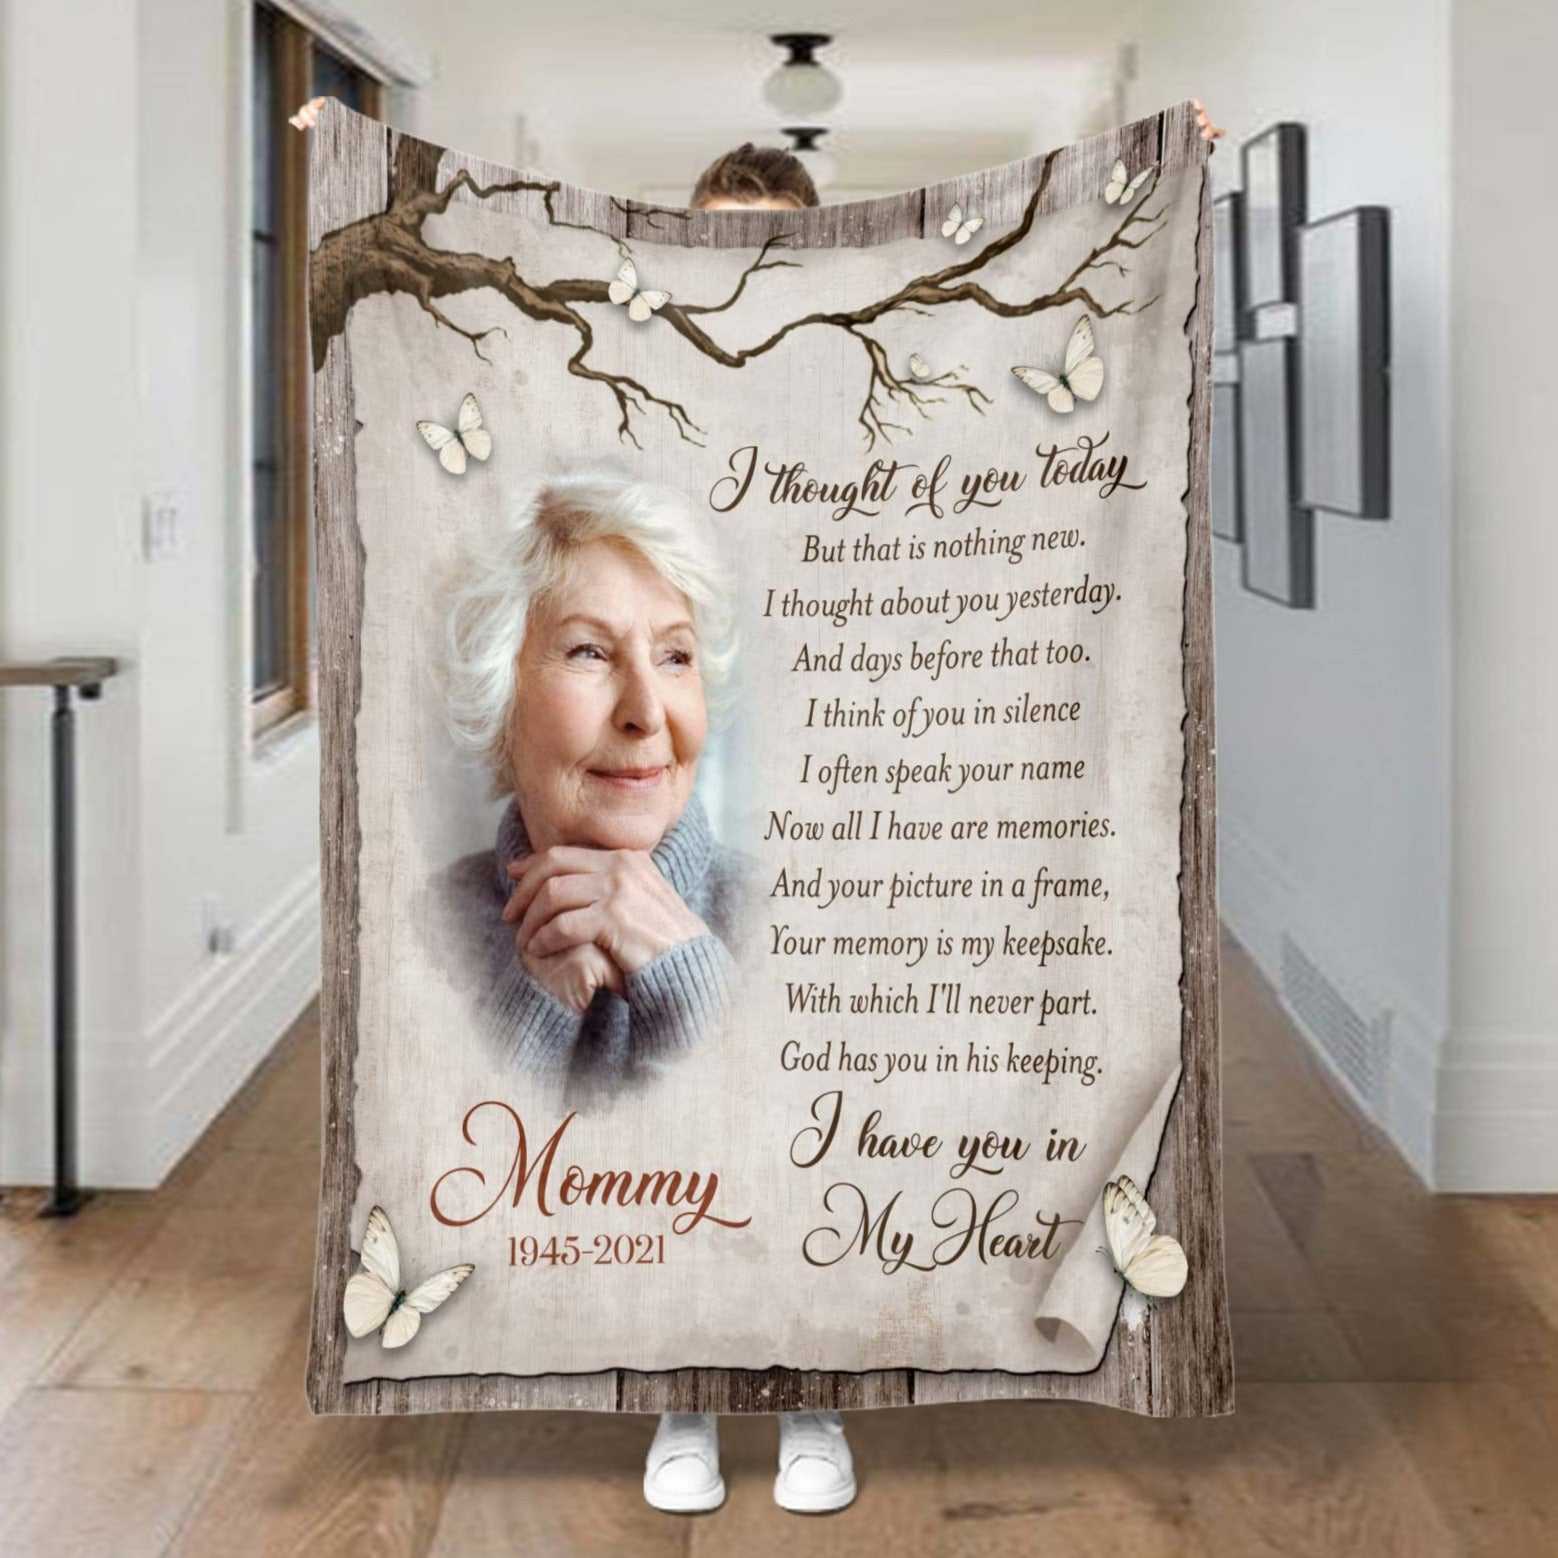 Memorial Butterfly Blankets For Loss Of Mother, In Loving Memory Blankets, Personalized Memory Blankets With Pictures, Funeral Blankets